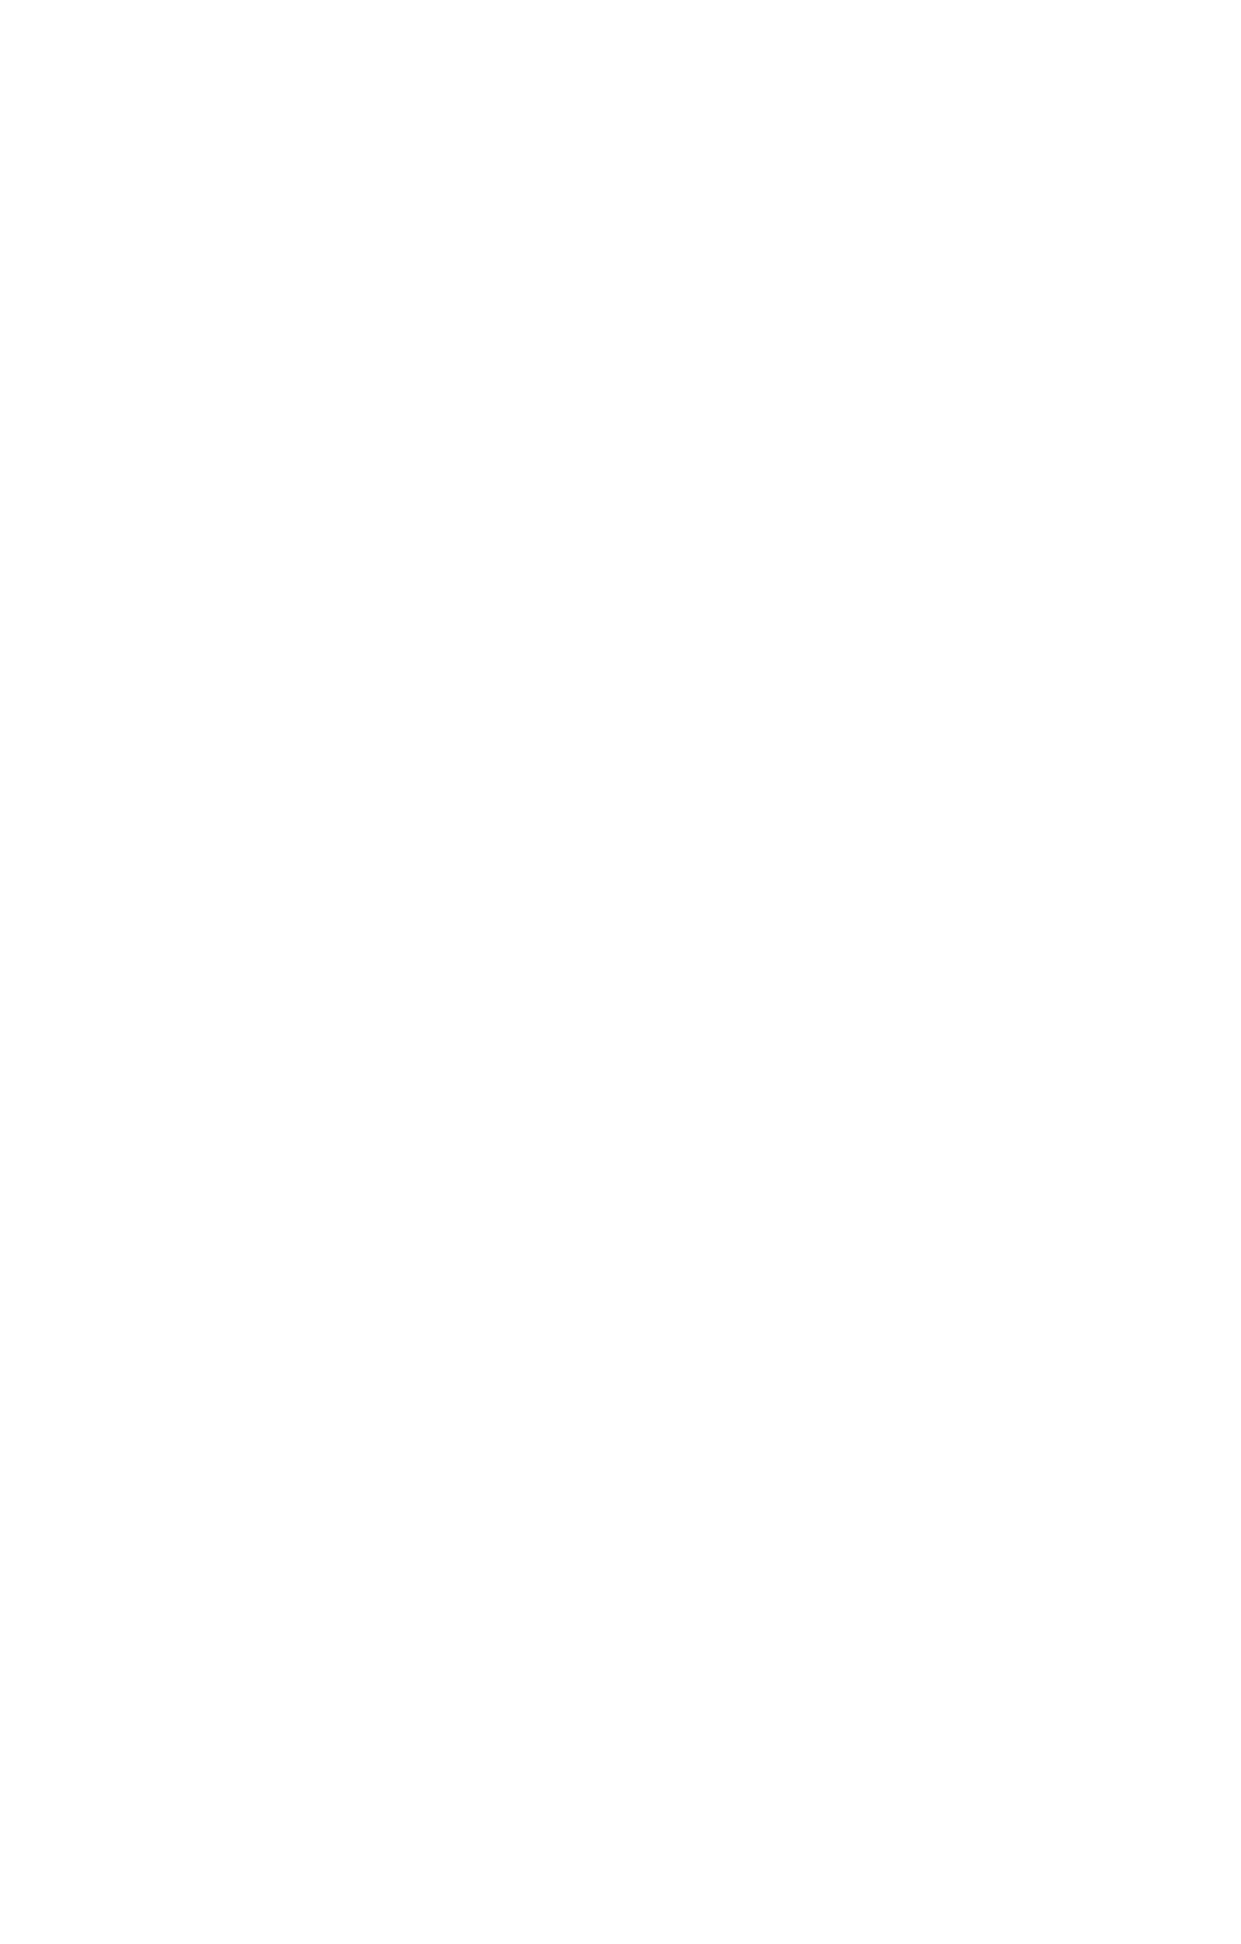 A logo with a black background depicting SCHLOSS and FLEESENSEE